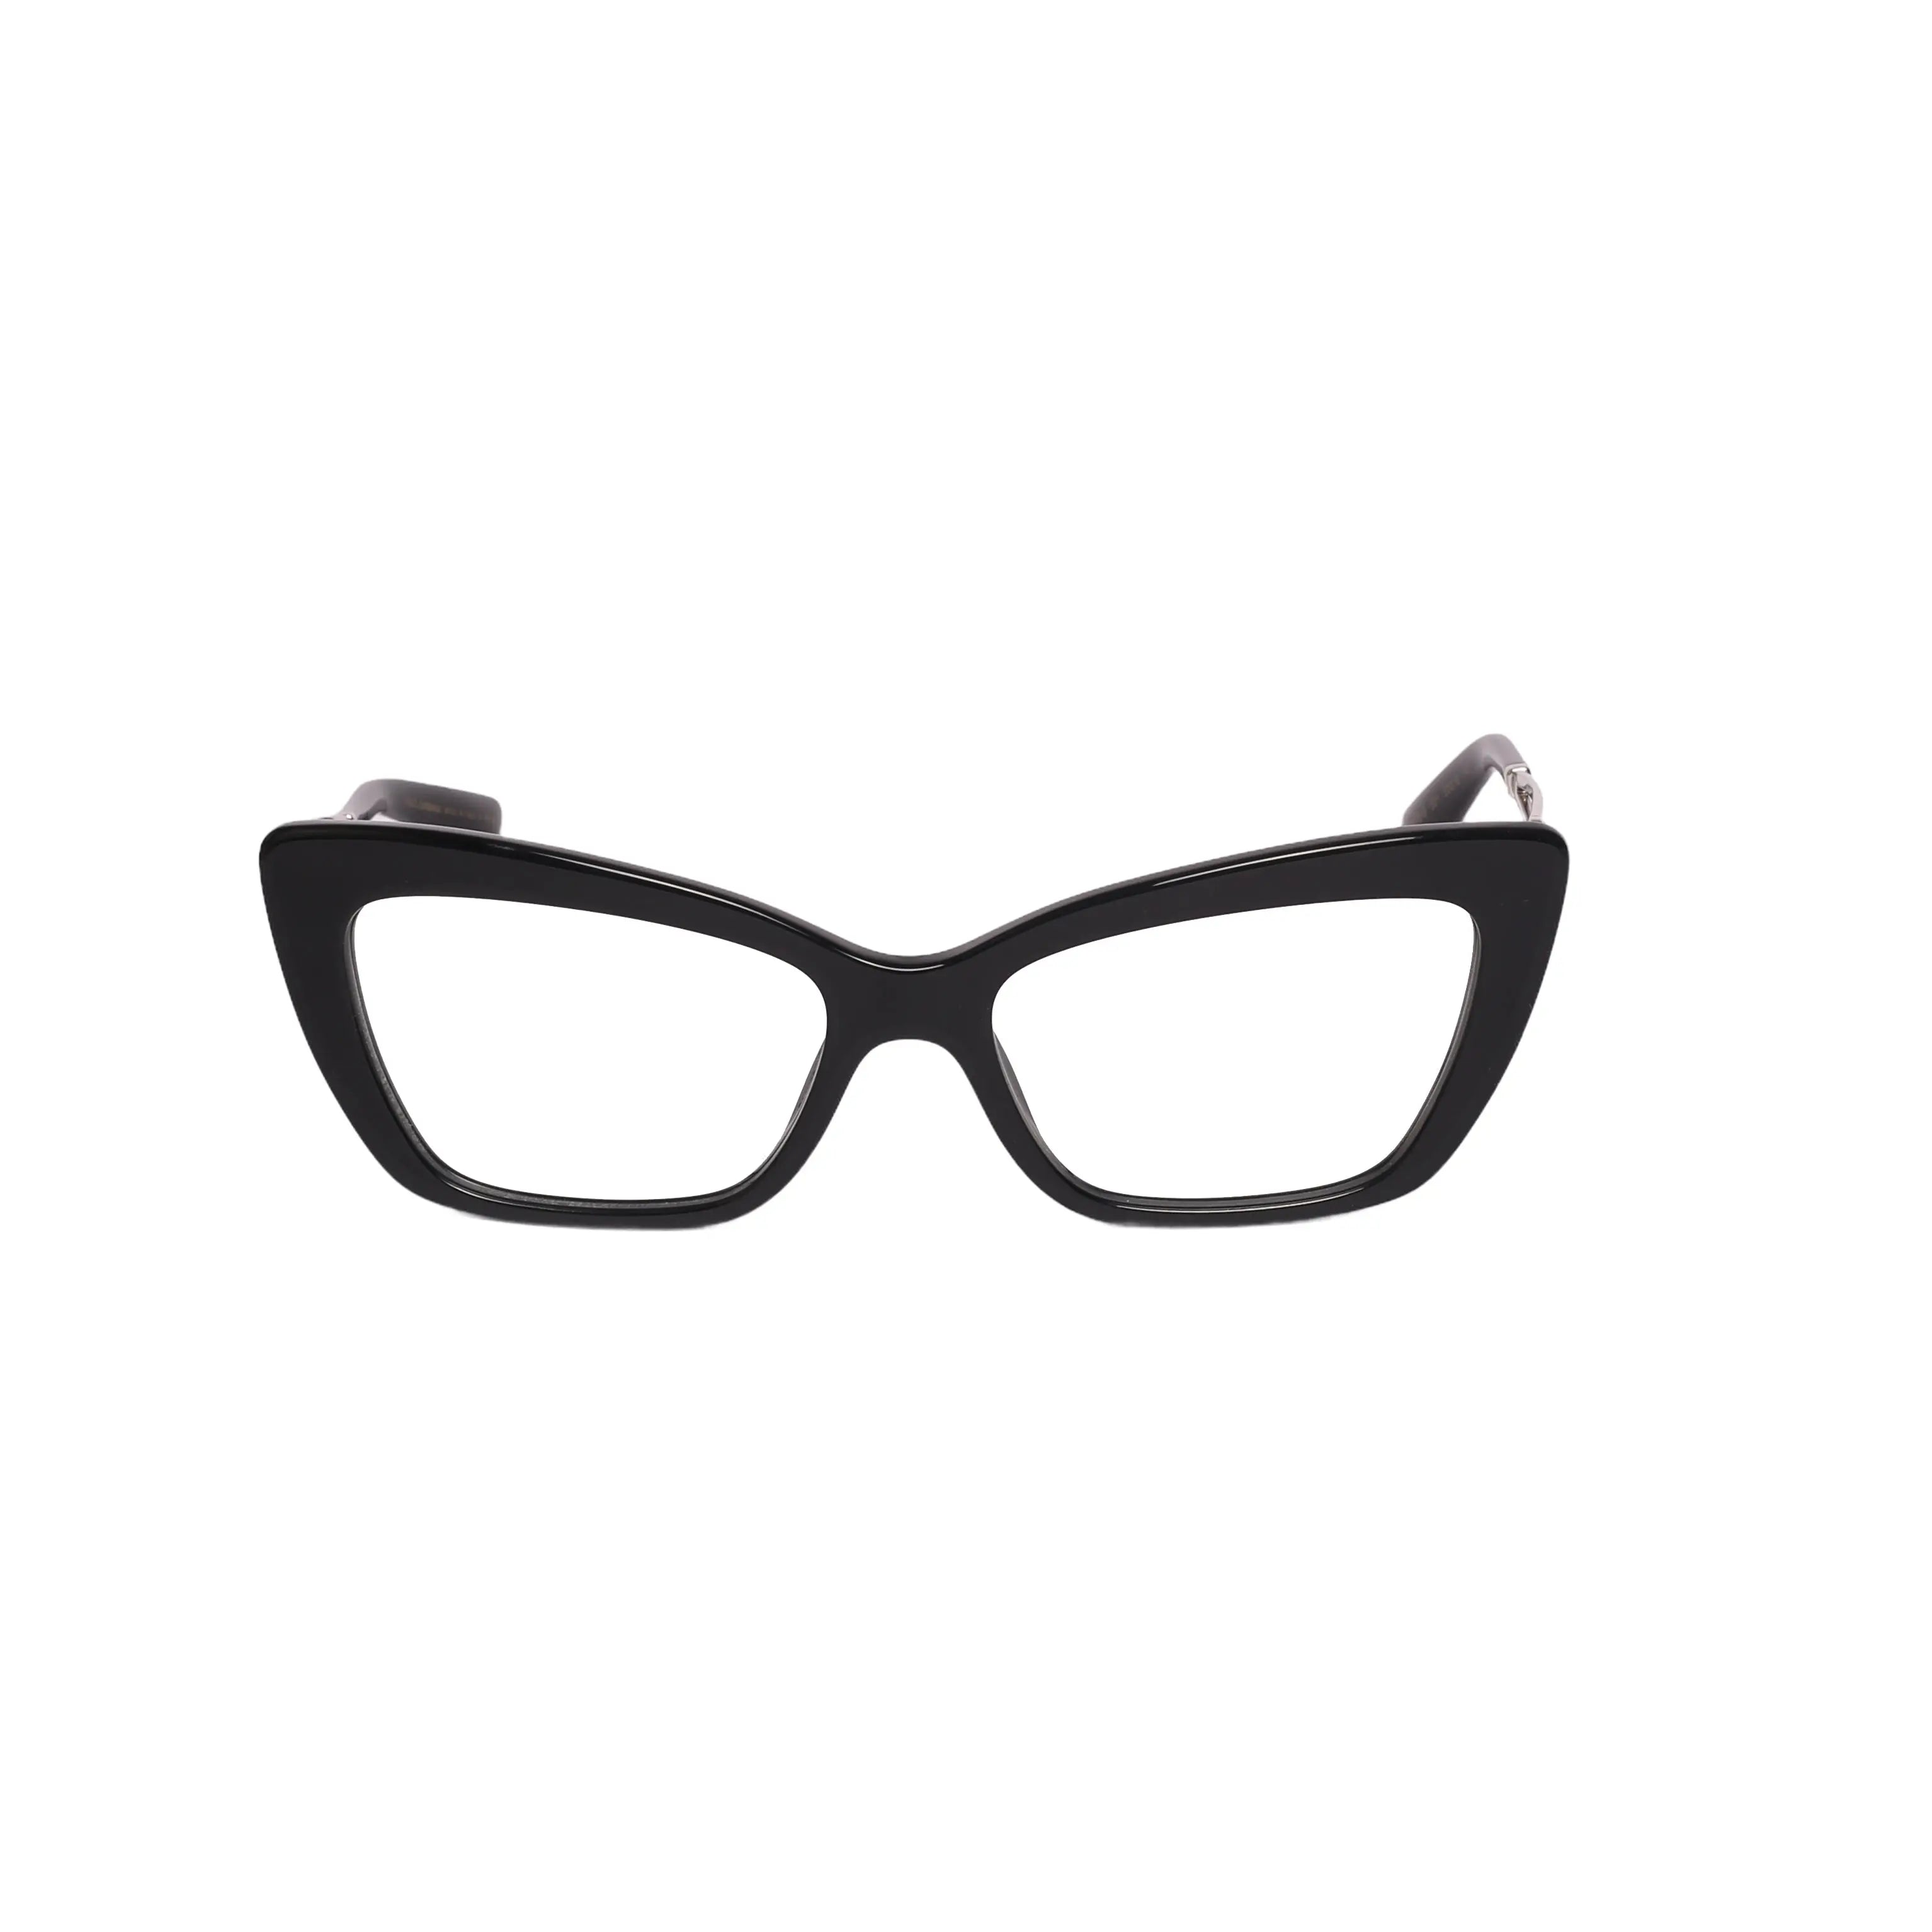 Dolce & Gabbana (D&G) DG 3375B-53-5015 EyeglassesFeel elegant and stylish in Dolce &amp; Gabbana (D&amp;G) DG 3375B-53-5015 Eyeglasses. These glasses offer a unique, cutting-edge style that will turn heads and makeEyeglasses